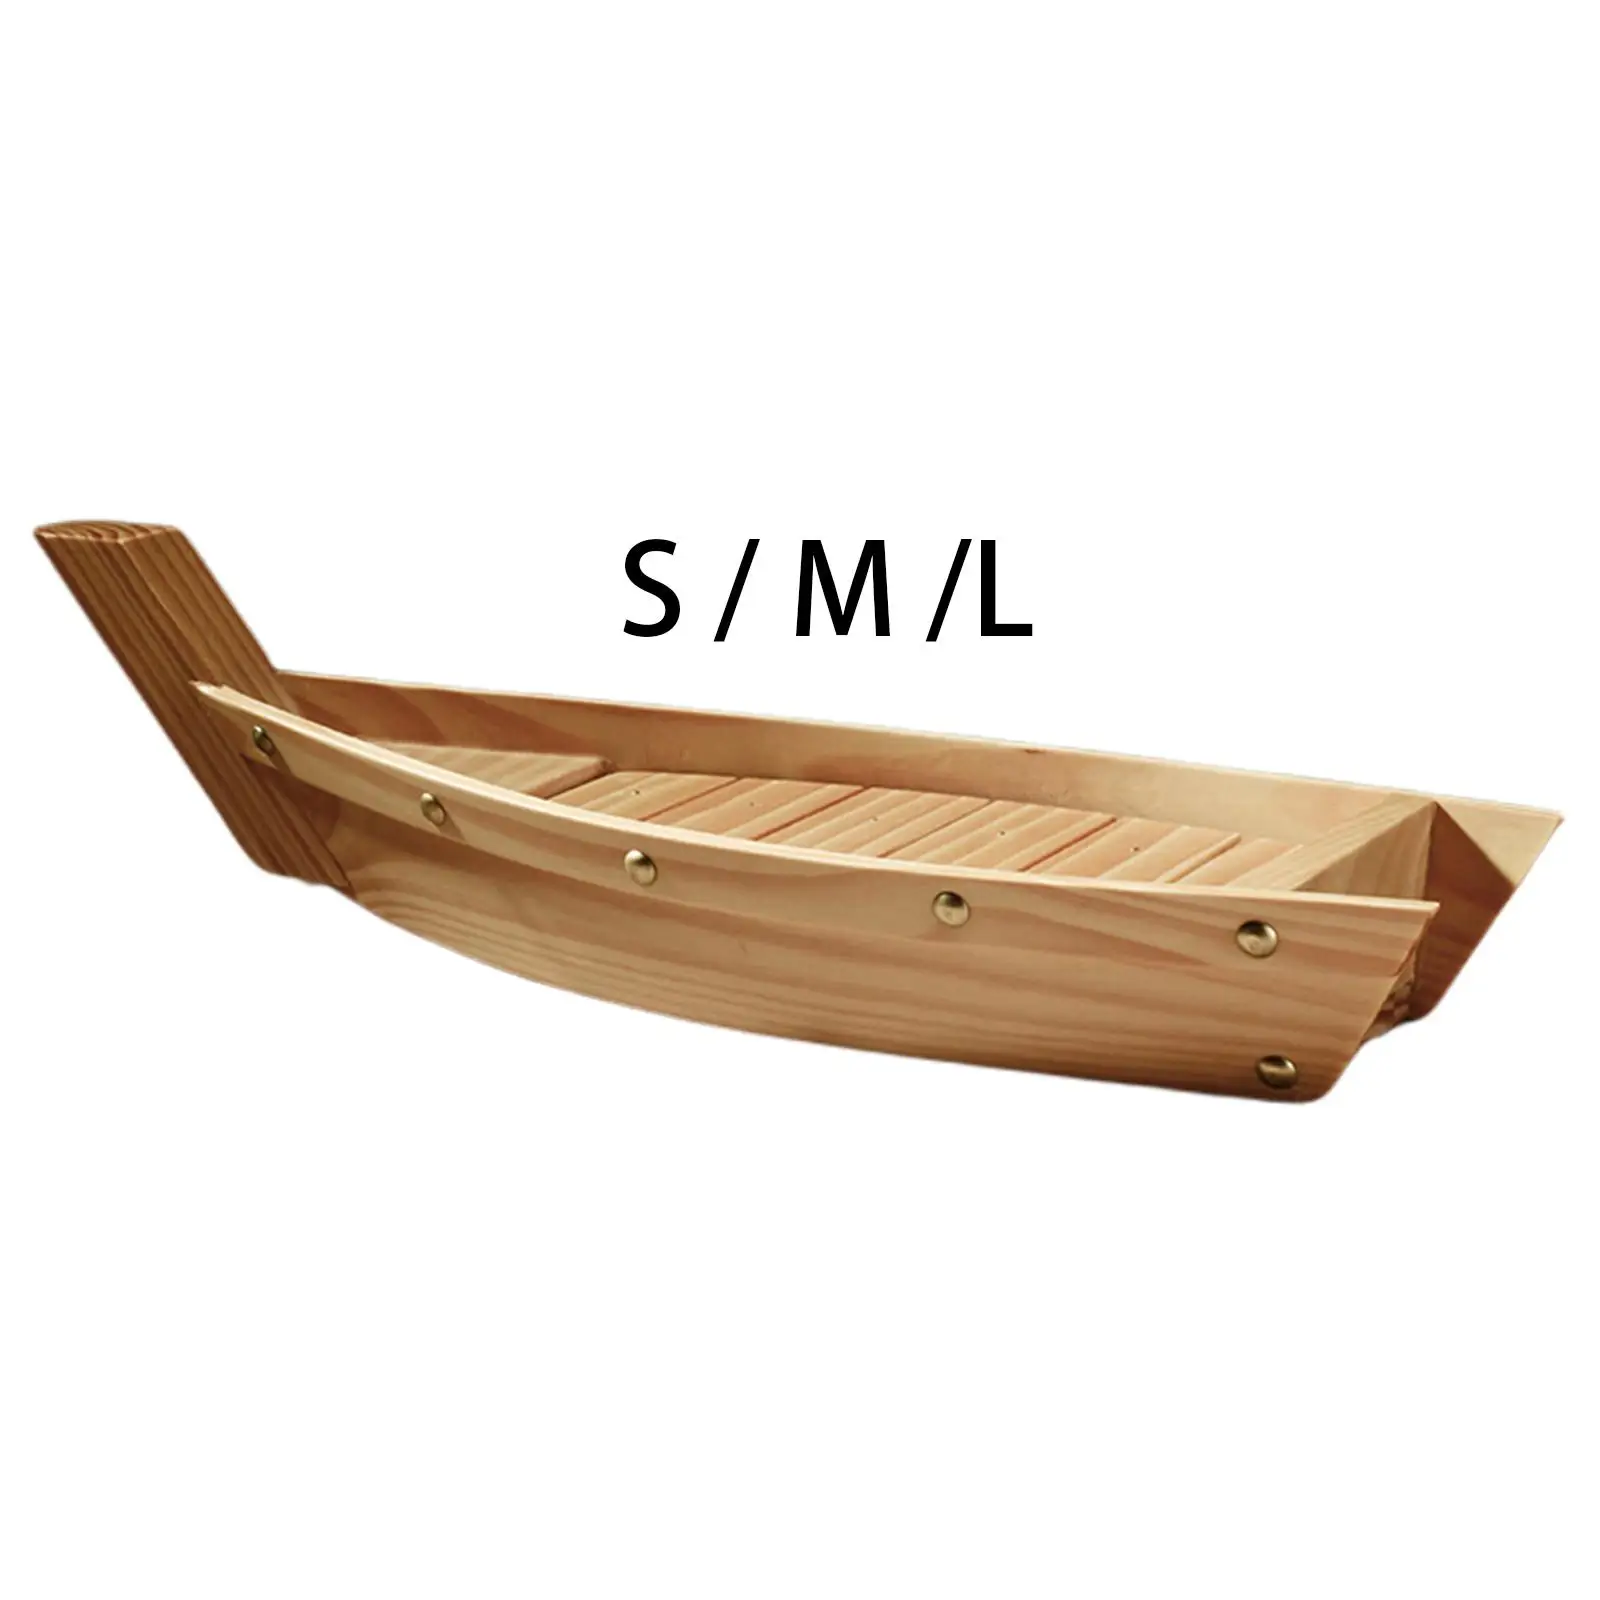 Wooden Sushi Boat Plate Melamine Tray Boat Serving Tray for Cafe Tea House Kitchen, Dining Room Steak